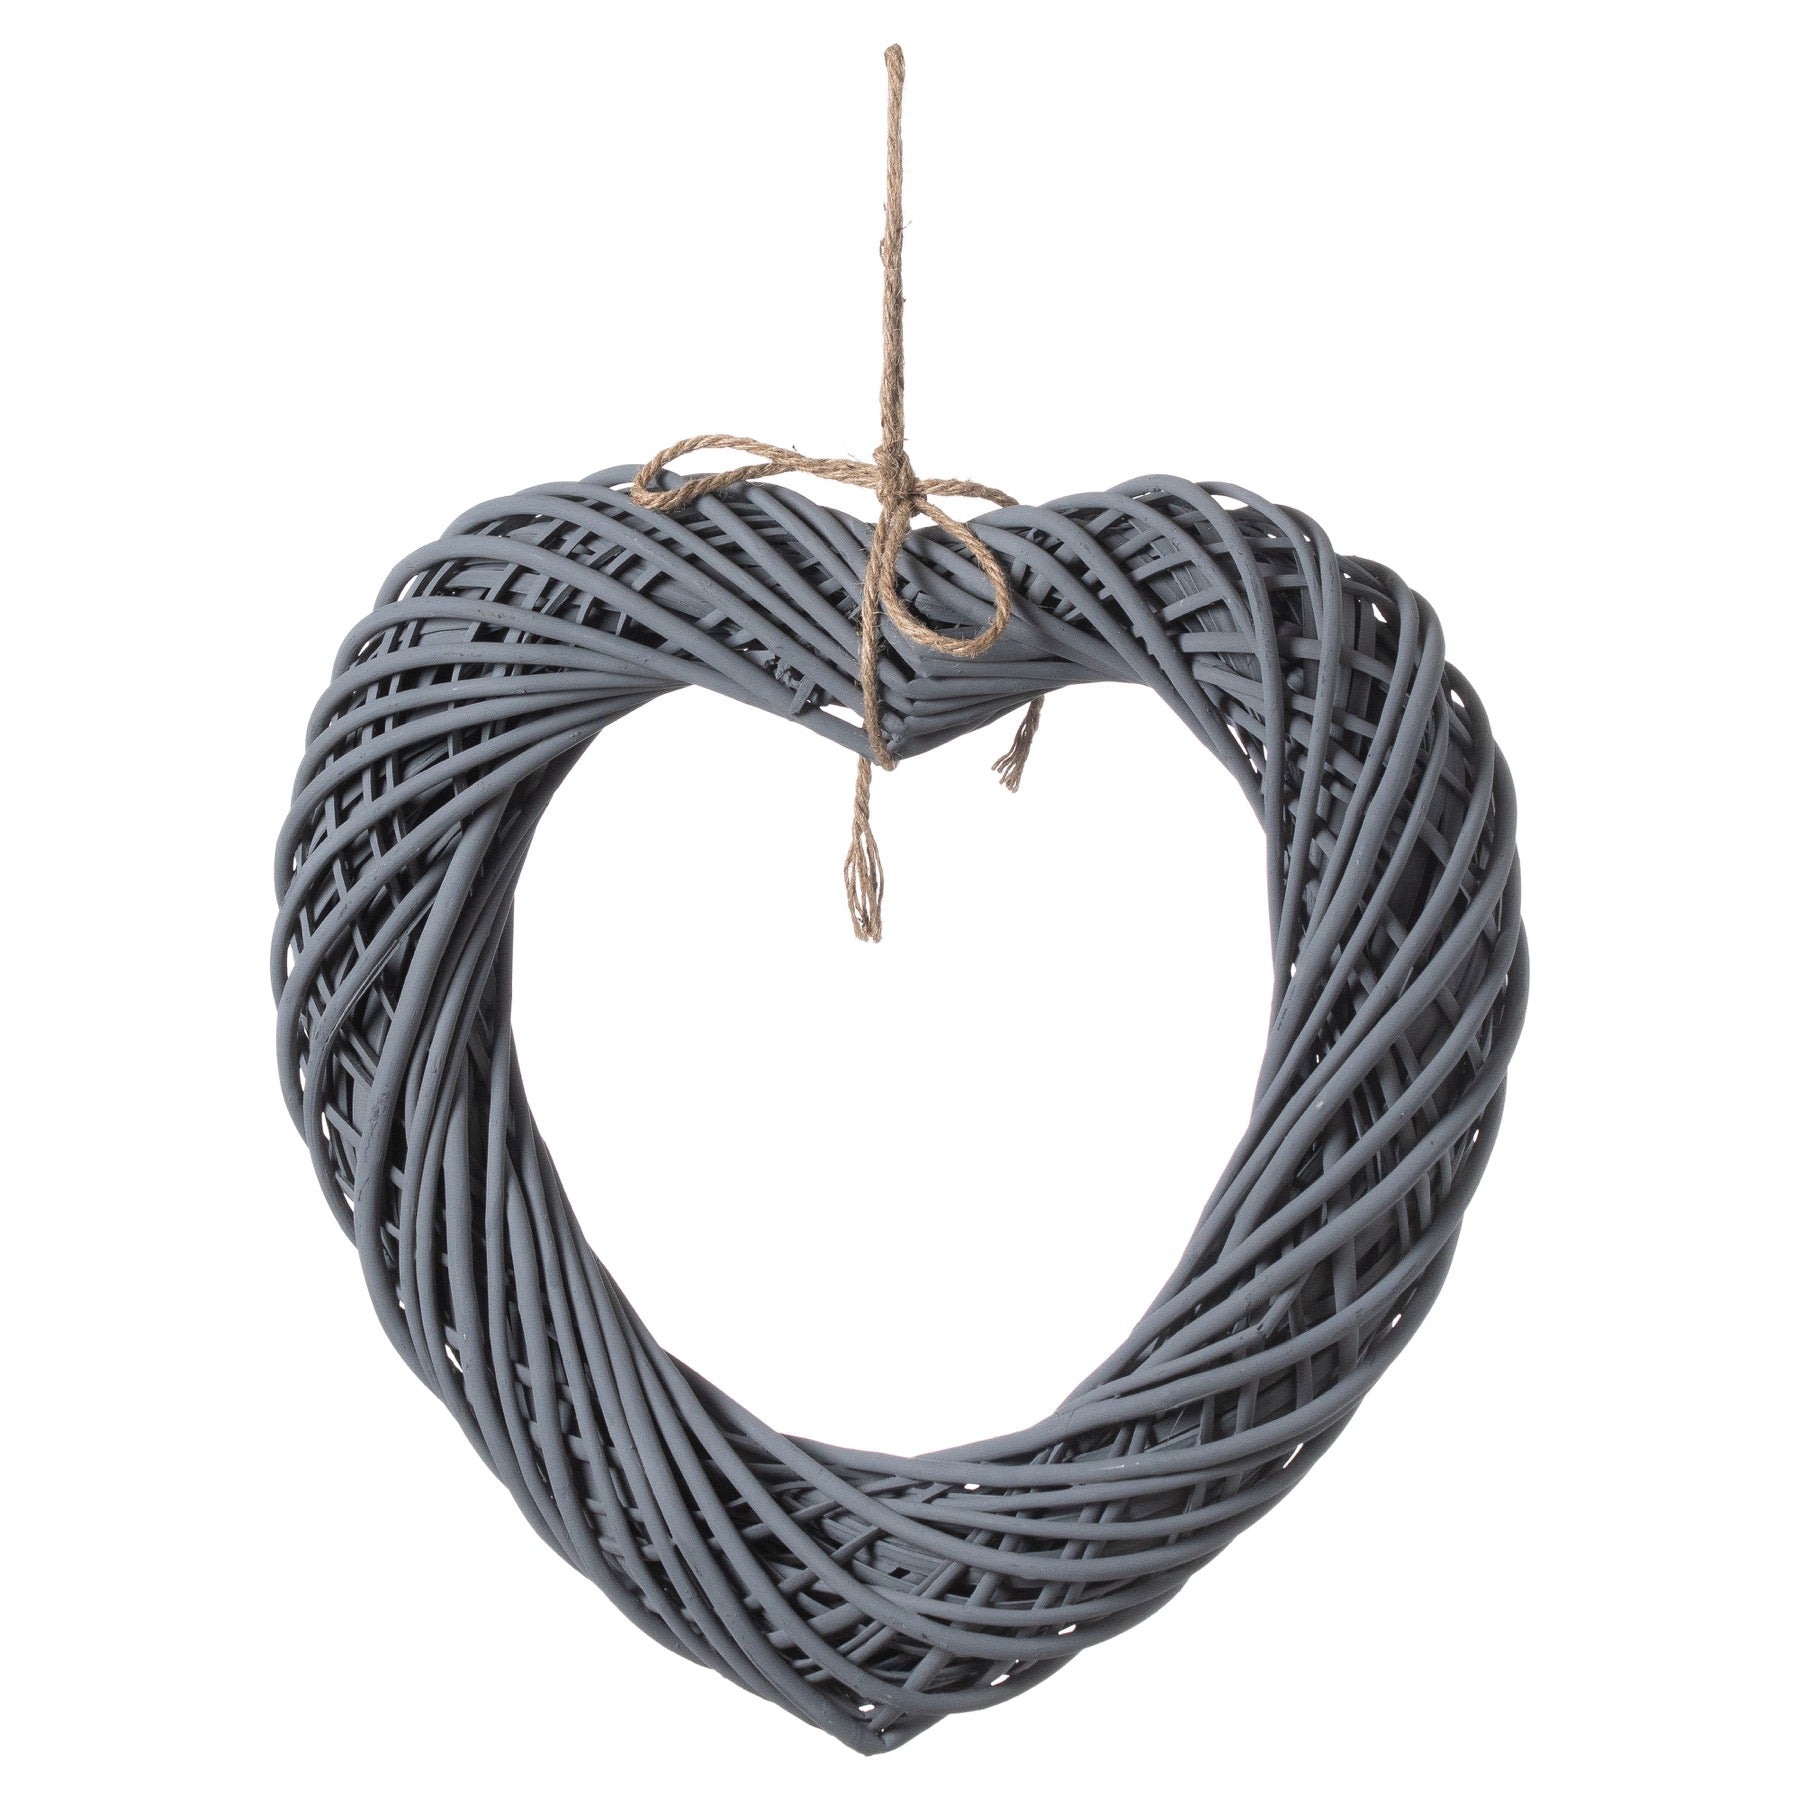 View Grey Large Wicker Hanging Heart With Rope Detail information